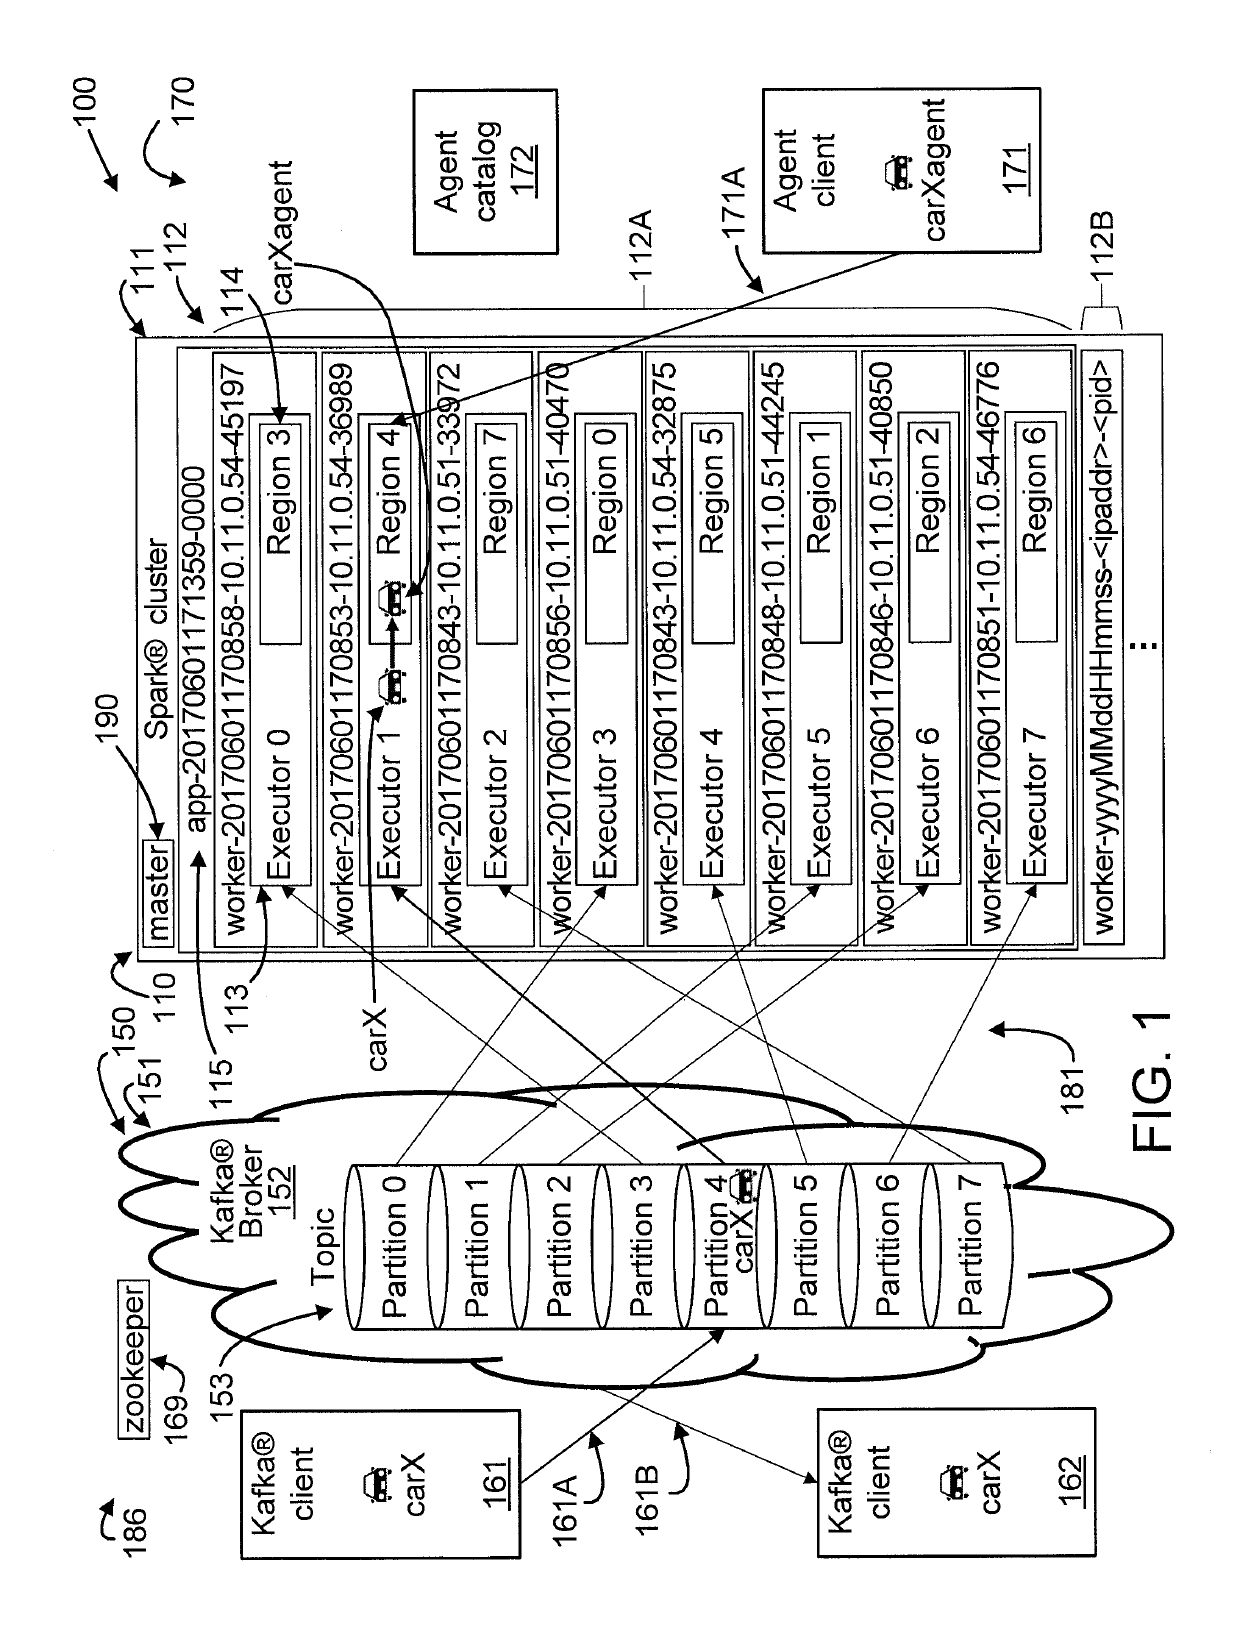 Integrating multiple distributed data processing servers with different data partitioning and routing mechanisms, resource sharing policies and lifecycles into a single process